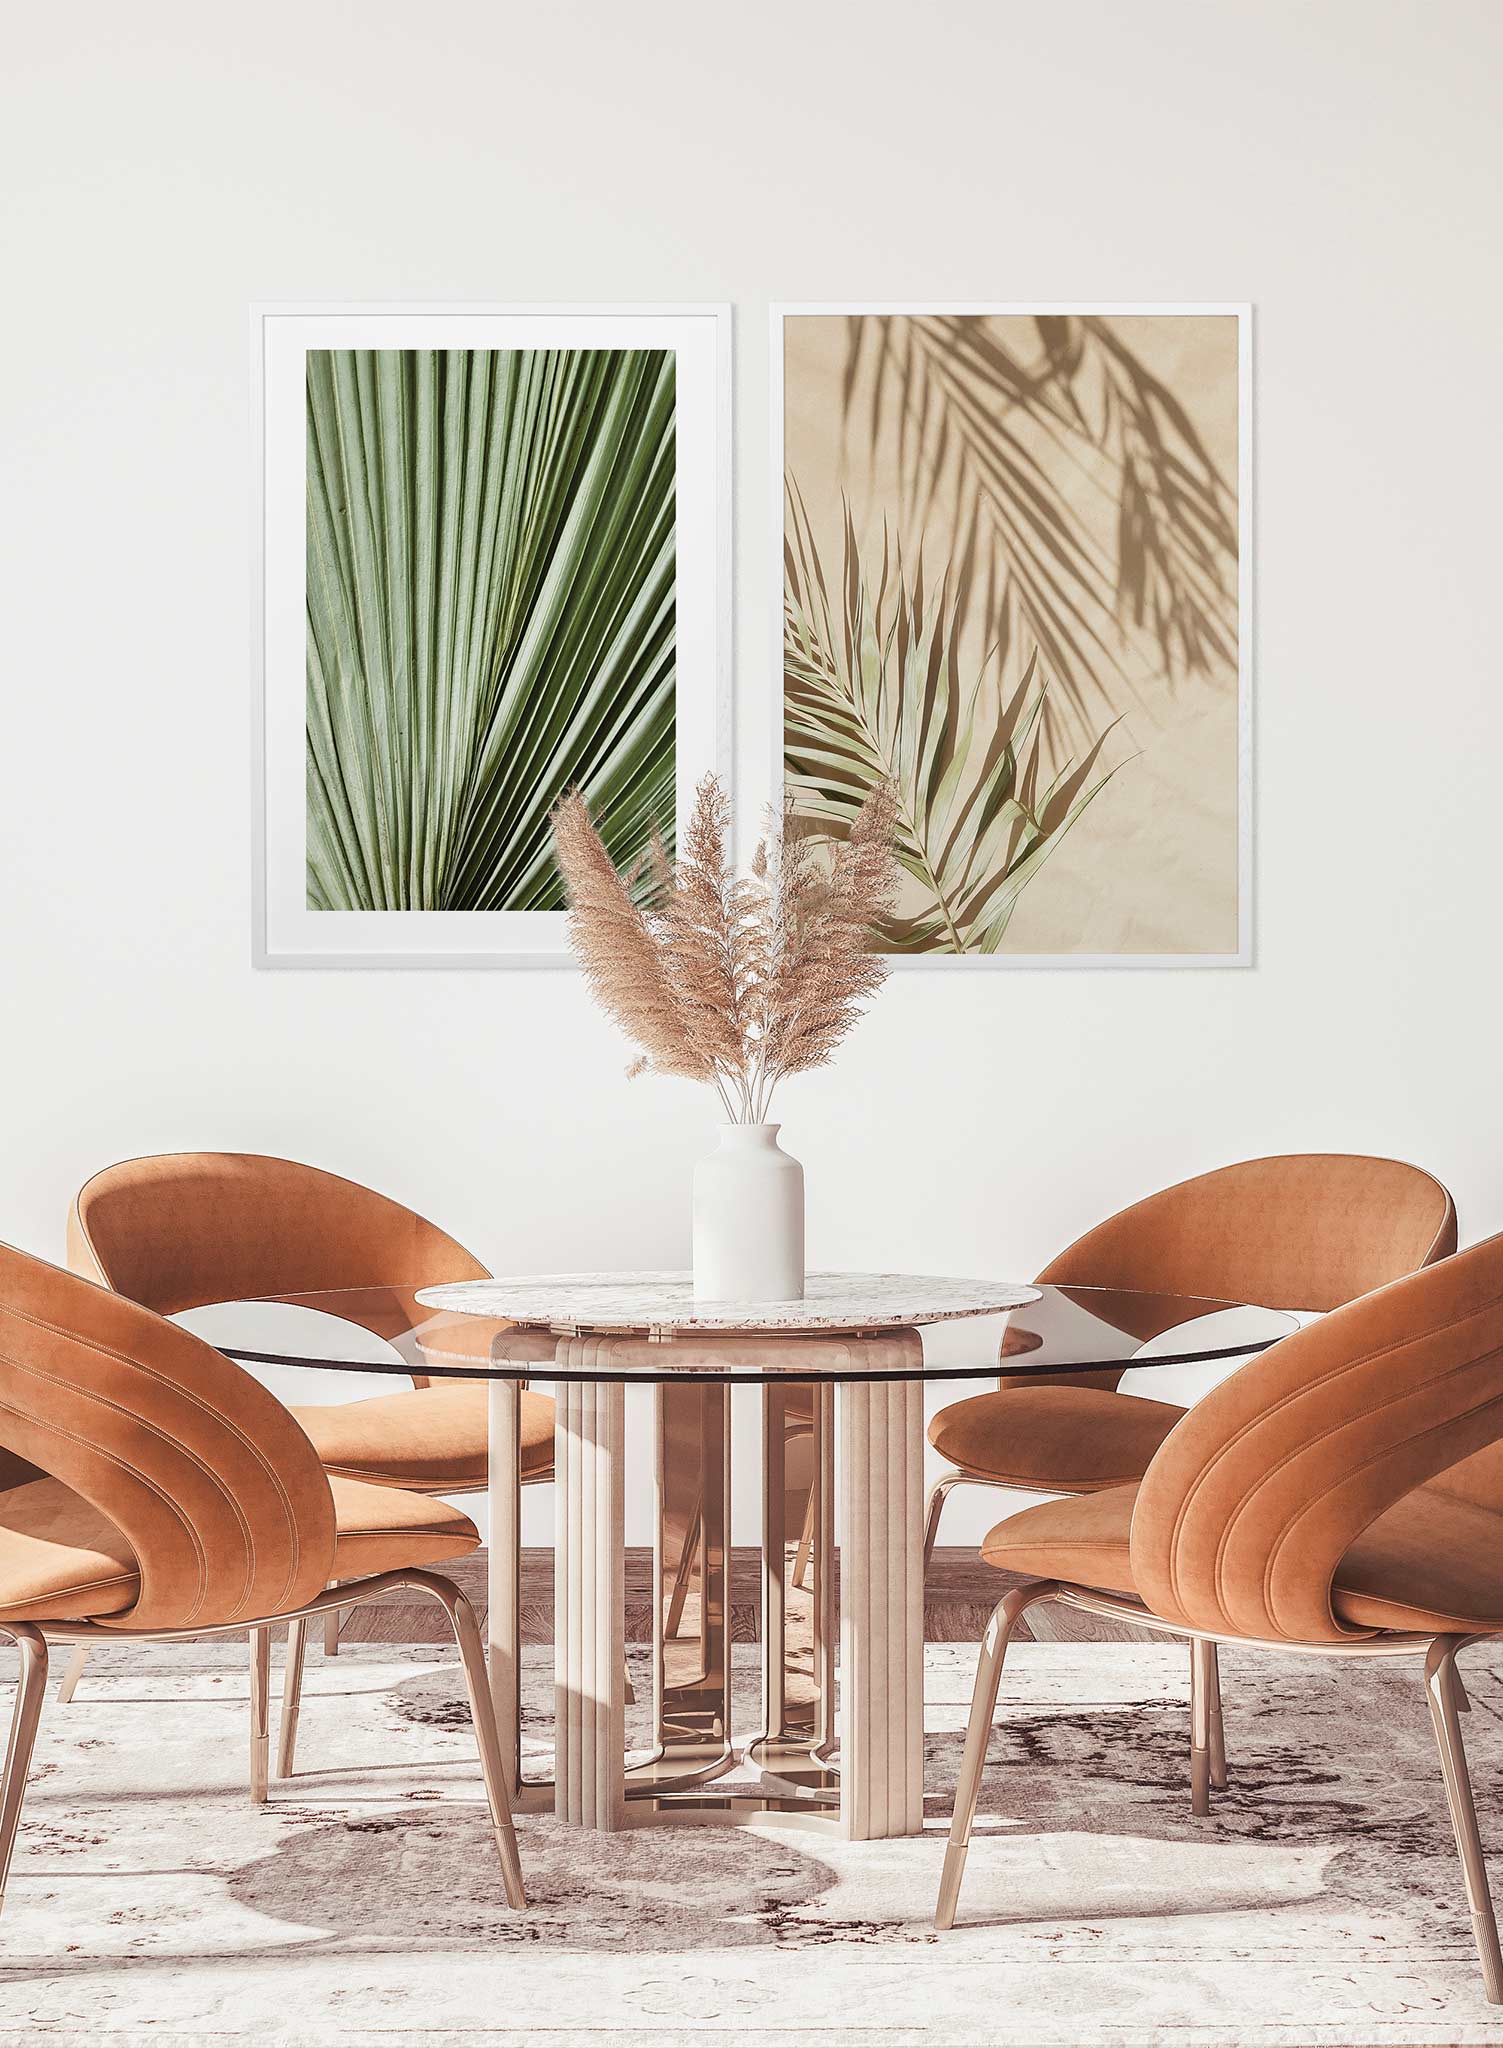 Scorching Day is a minimalist photography of a dry green parlor palm leaf on the left side mirrored by the shadow of another leaf on the right side by Opposite Wall.